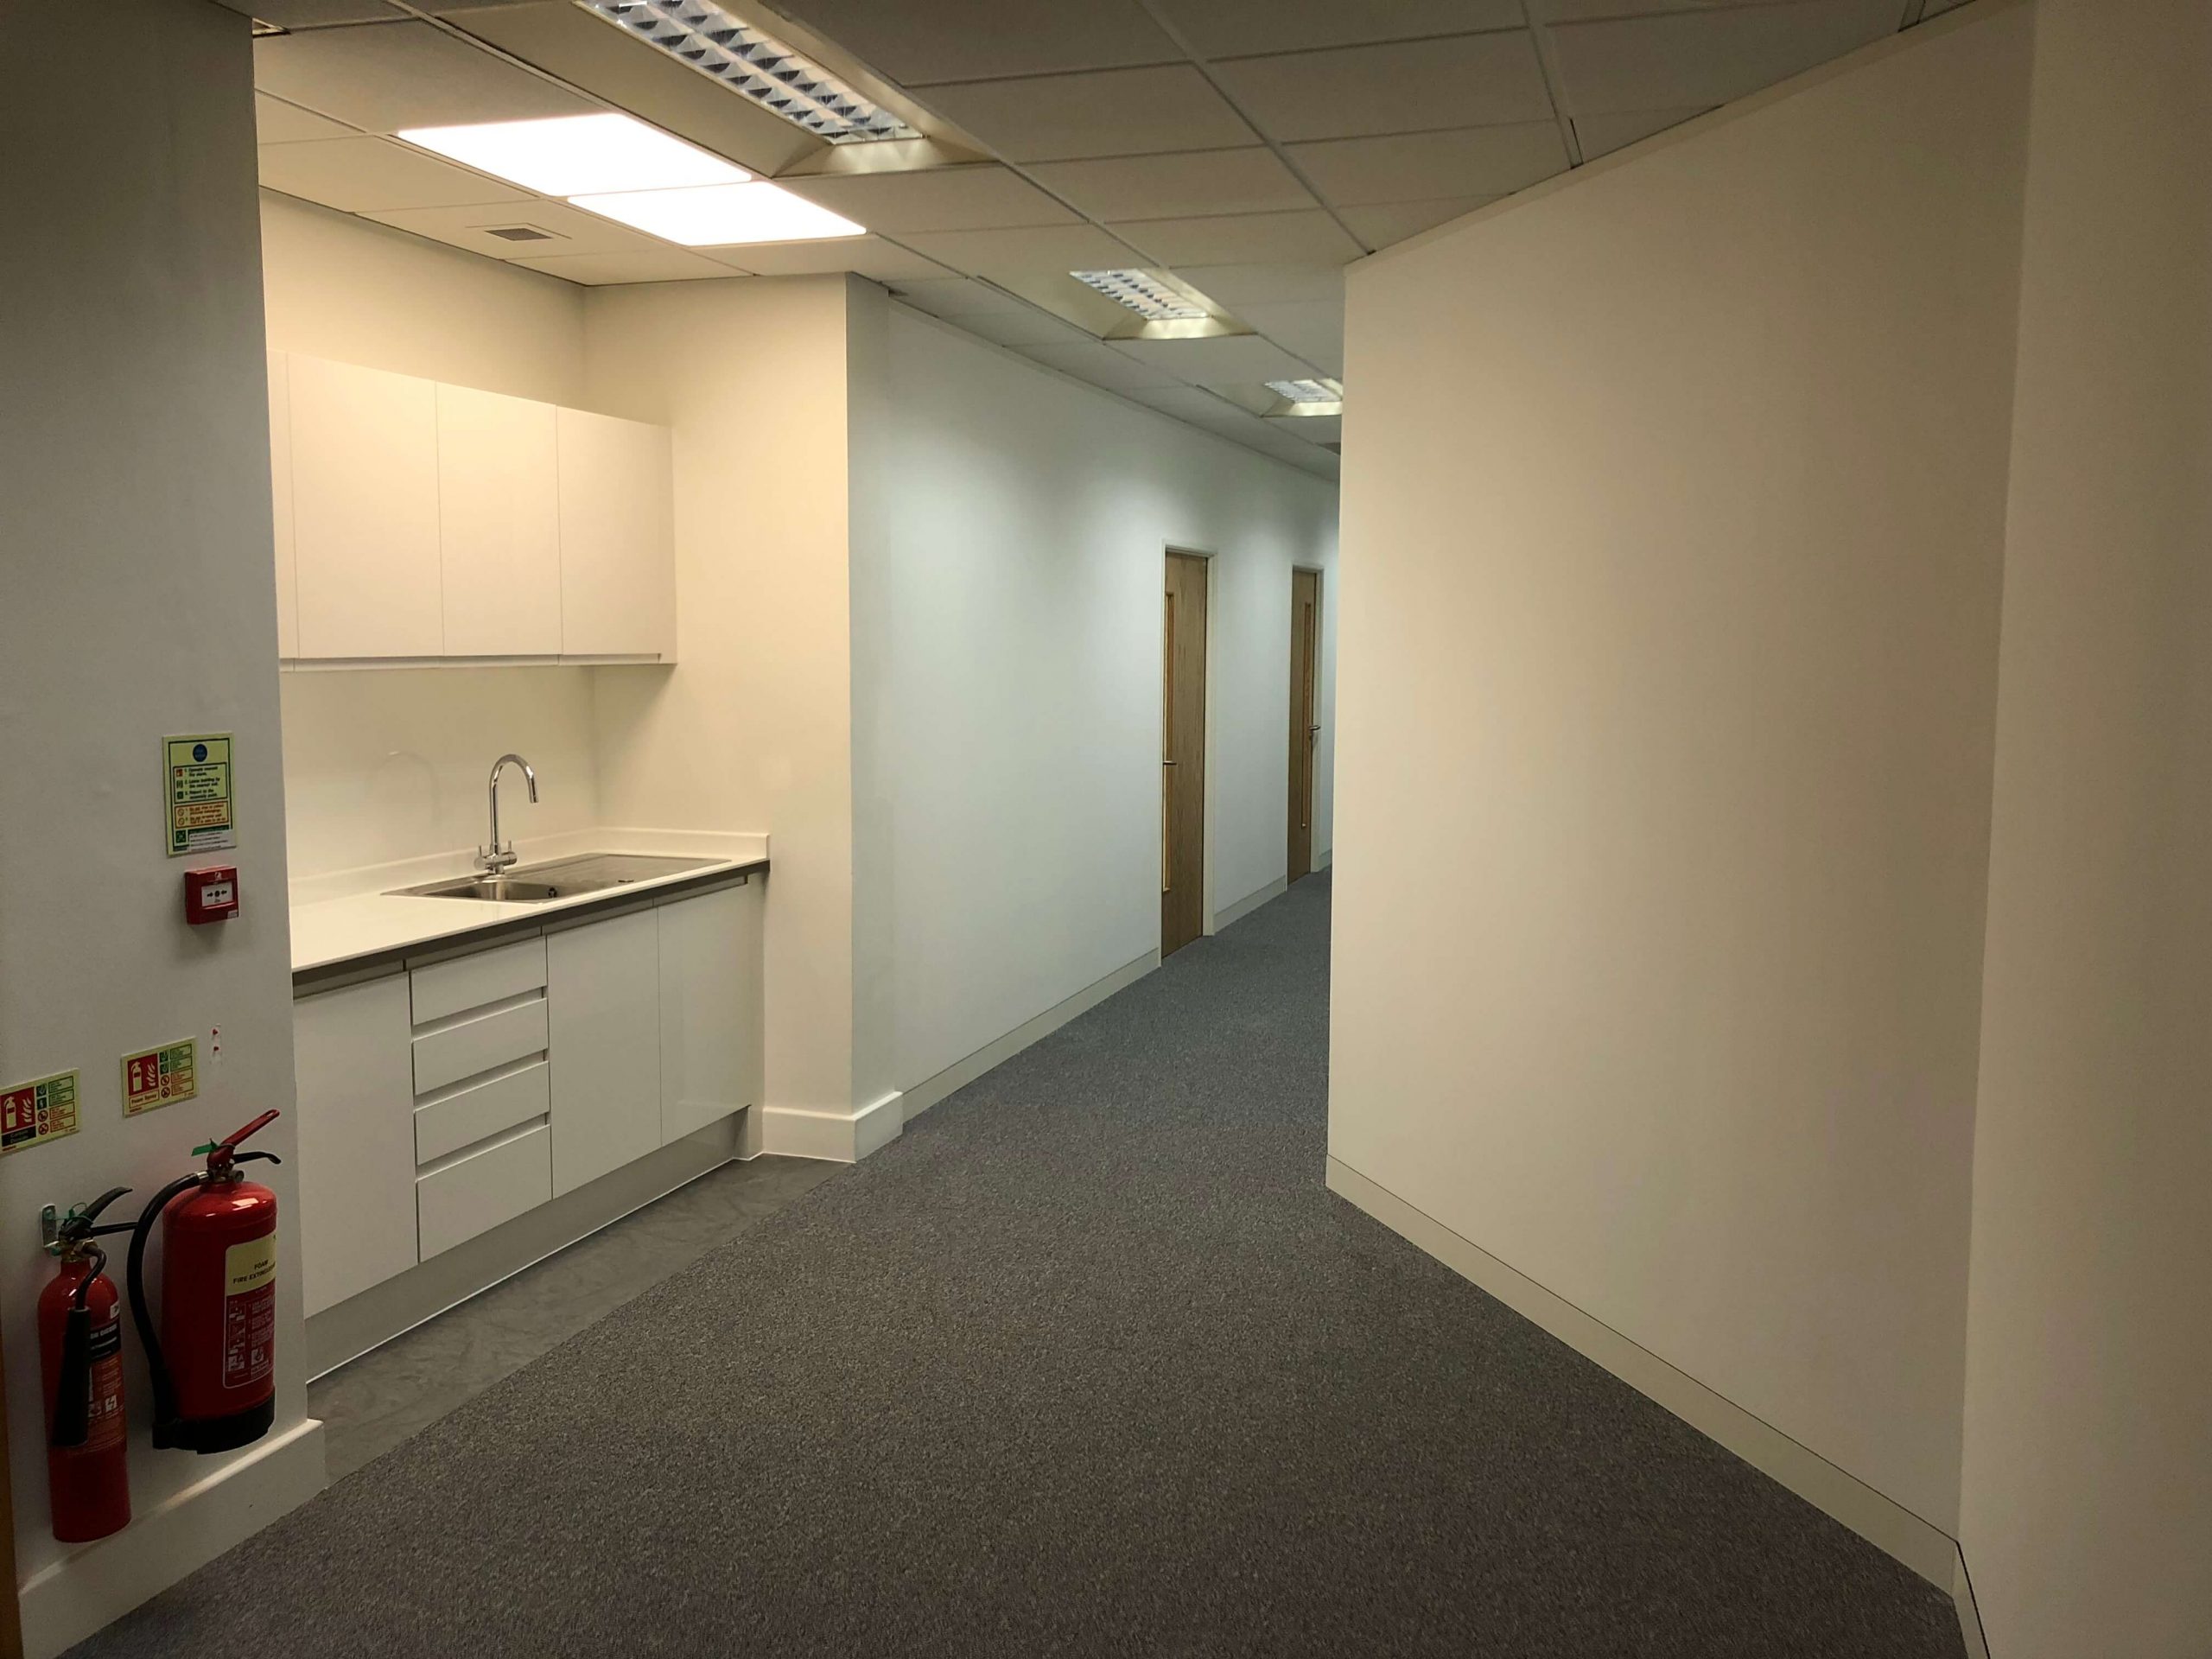 Sandhurst Interiors, commercial refurbishment, interior fit out solutions, partitioning, suspended ceilings, flooring